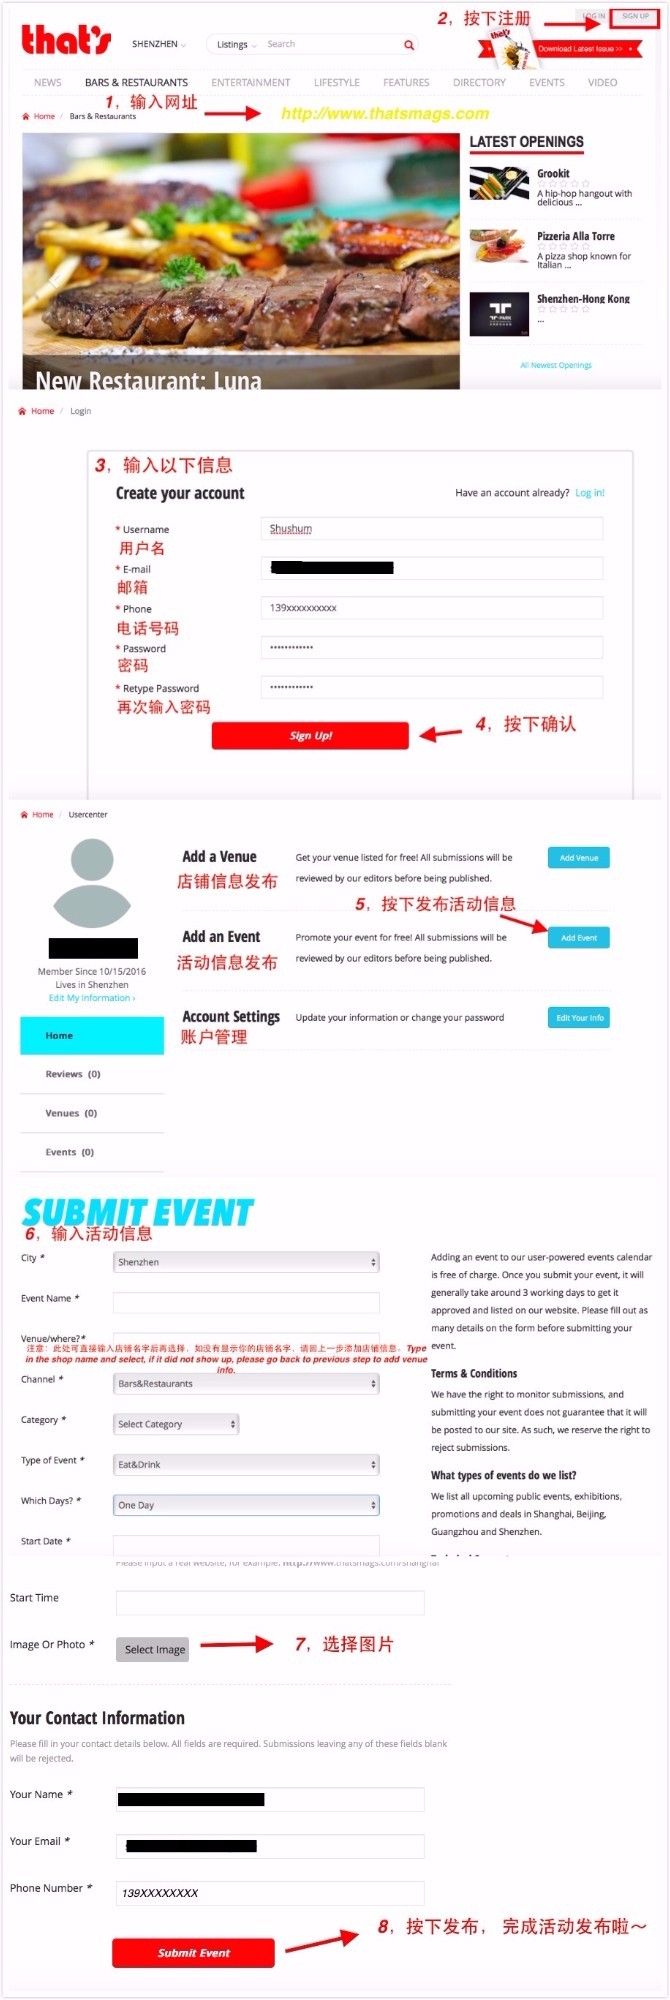 How to Upload an Event to Thatsmags.com and That's Shanghai, That's Beijing, That's Guangzhou, That's Shenzhen, That's PRD — thatsmags.com